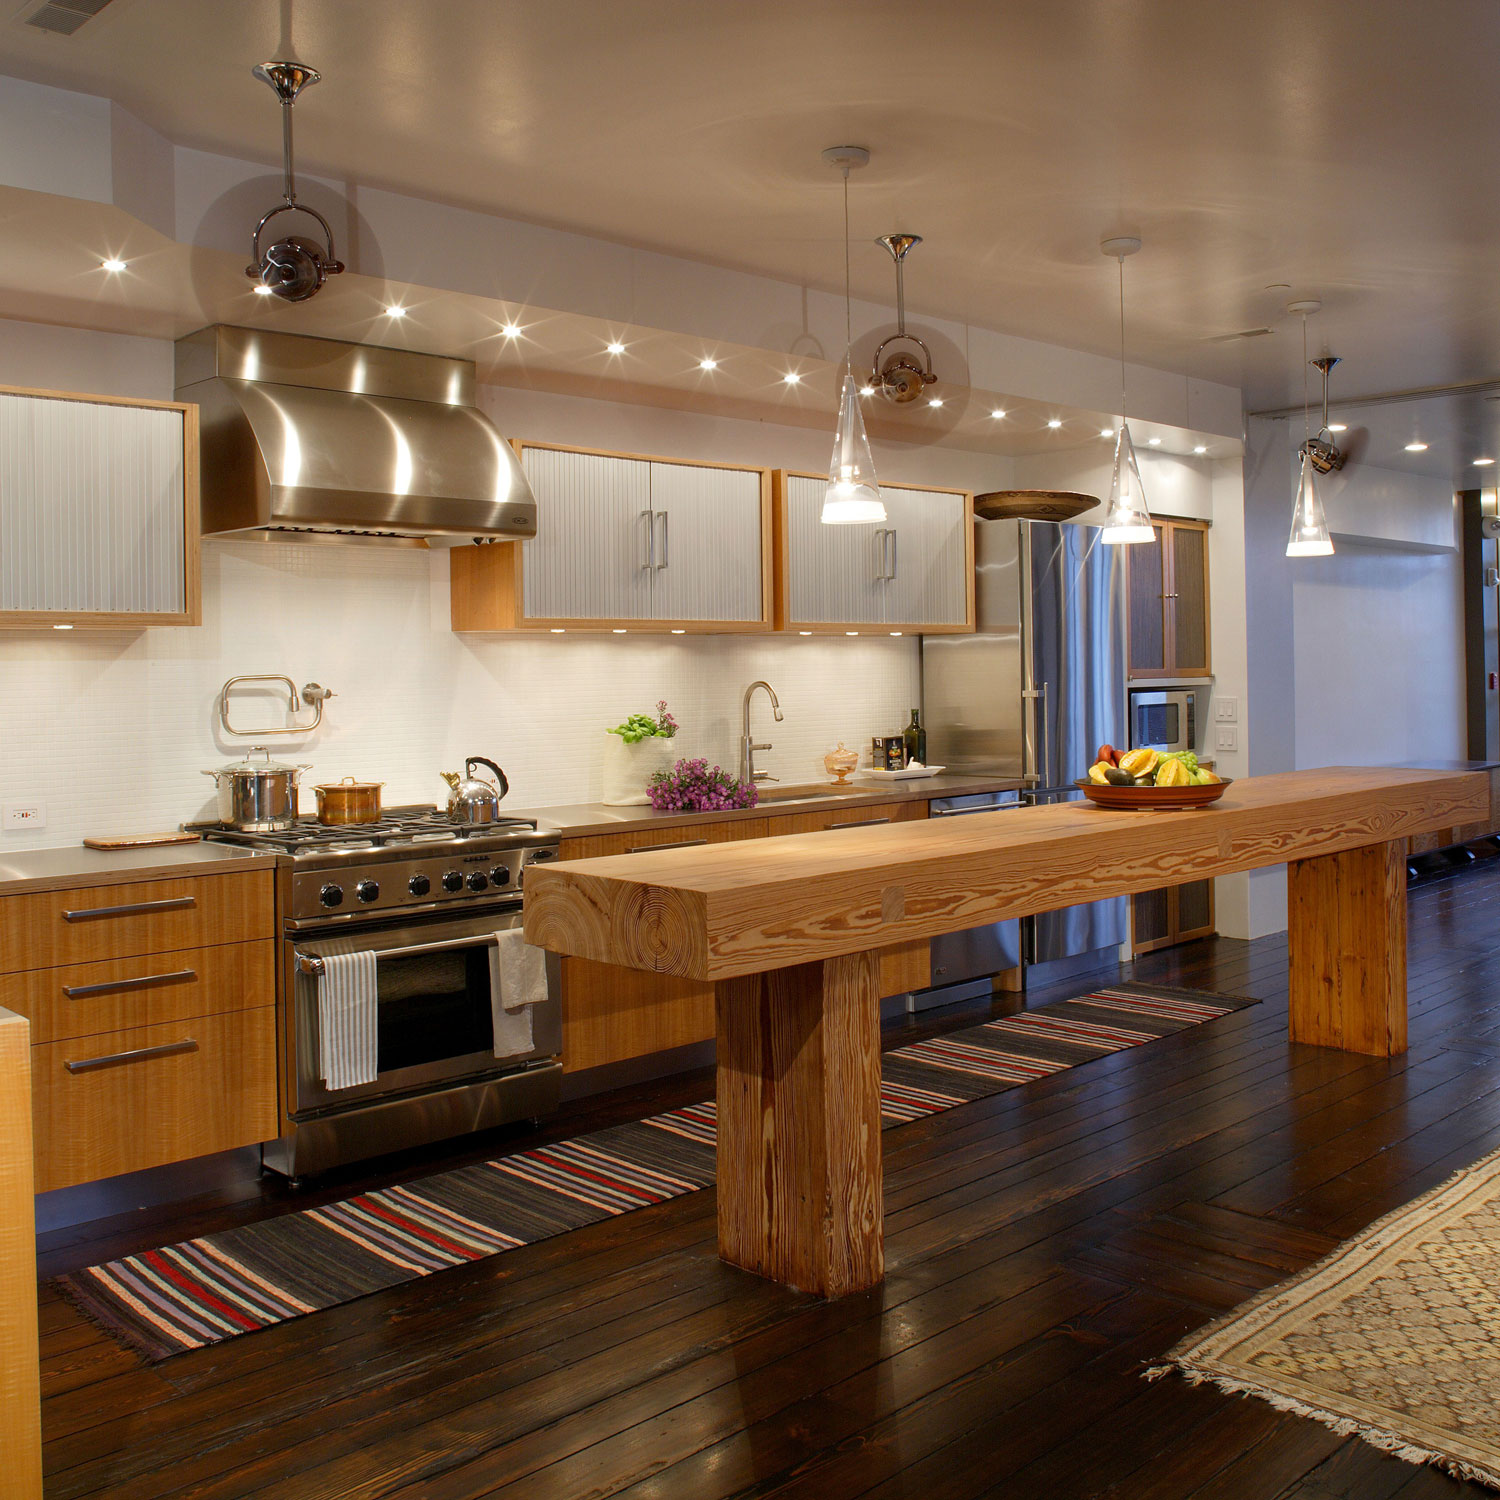 10 Tips To Help You Get the Right Ceiling fan for kitchen ...